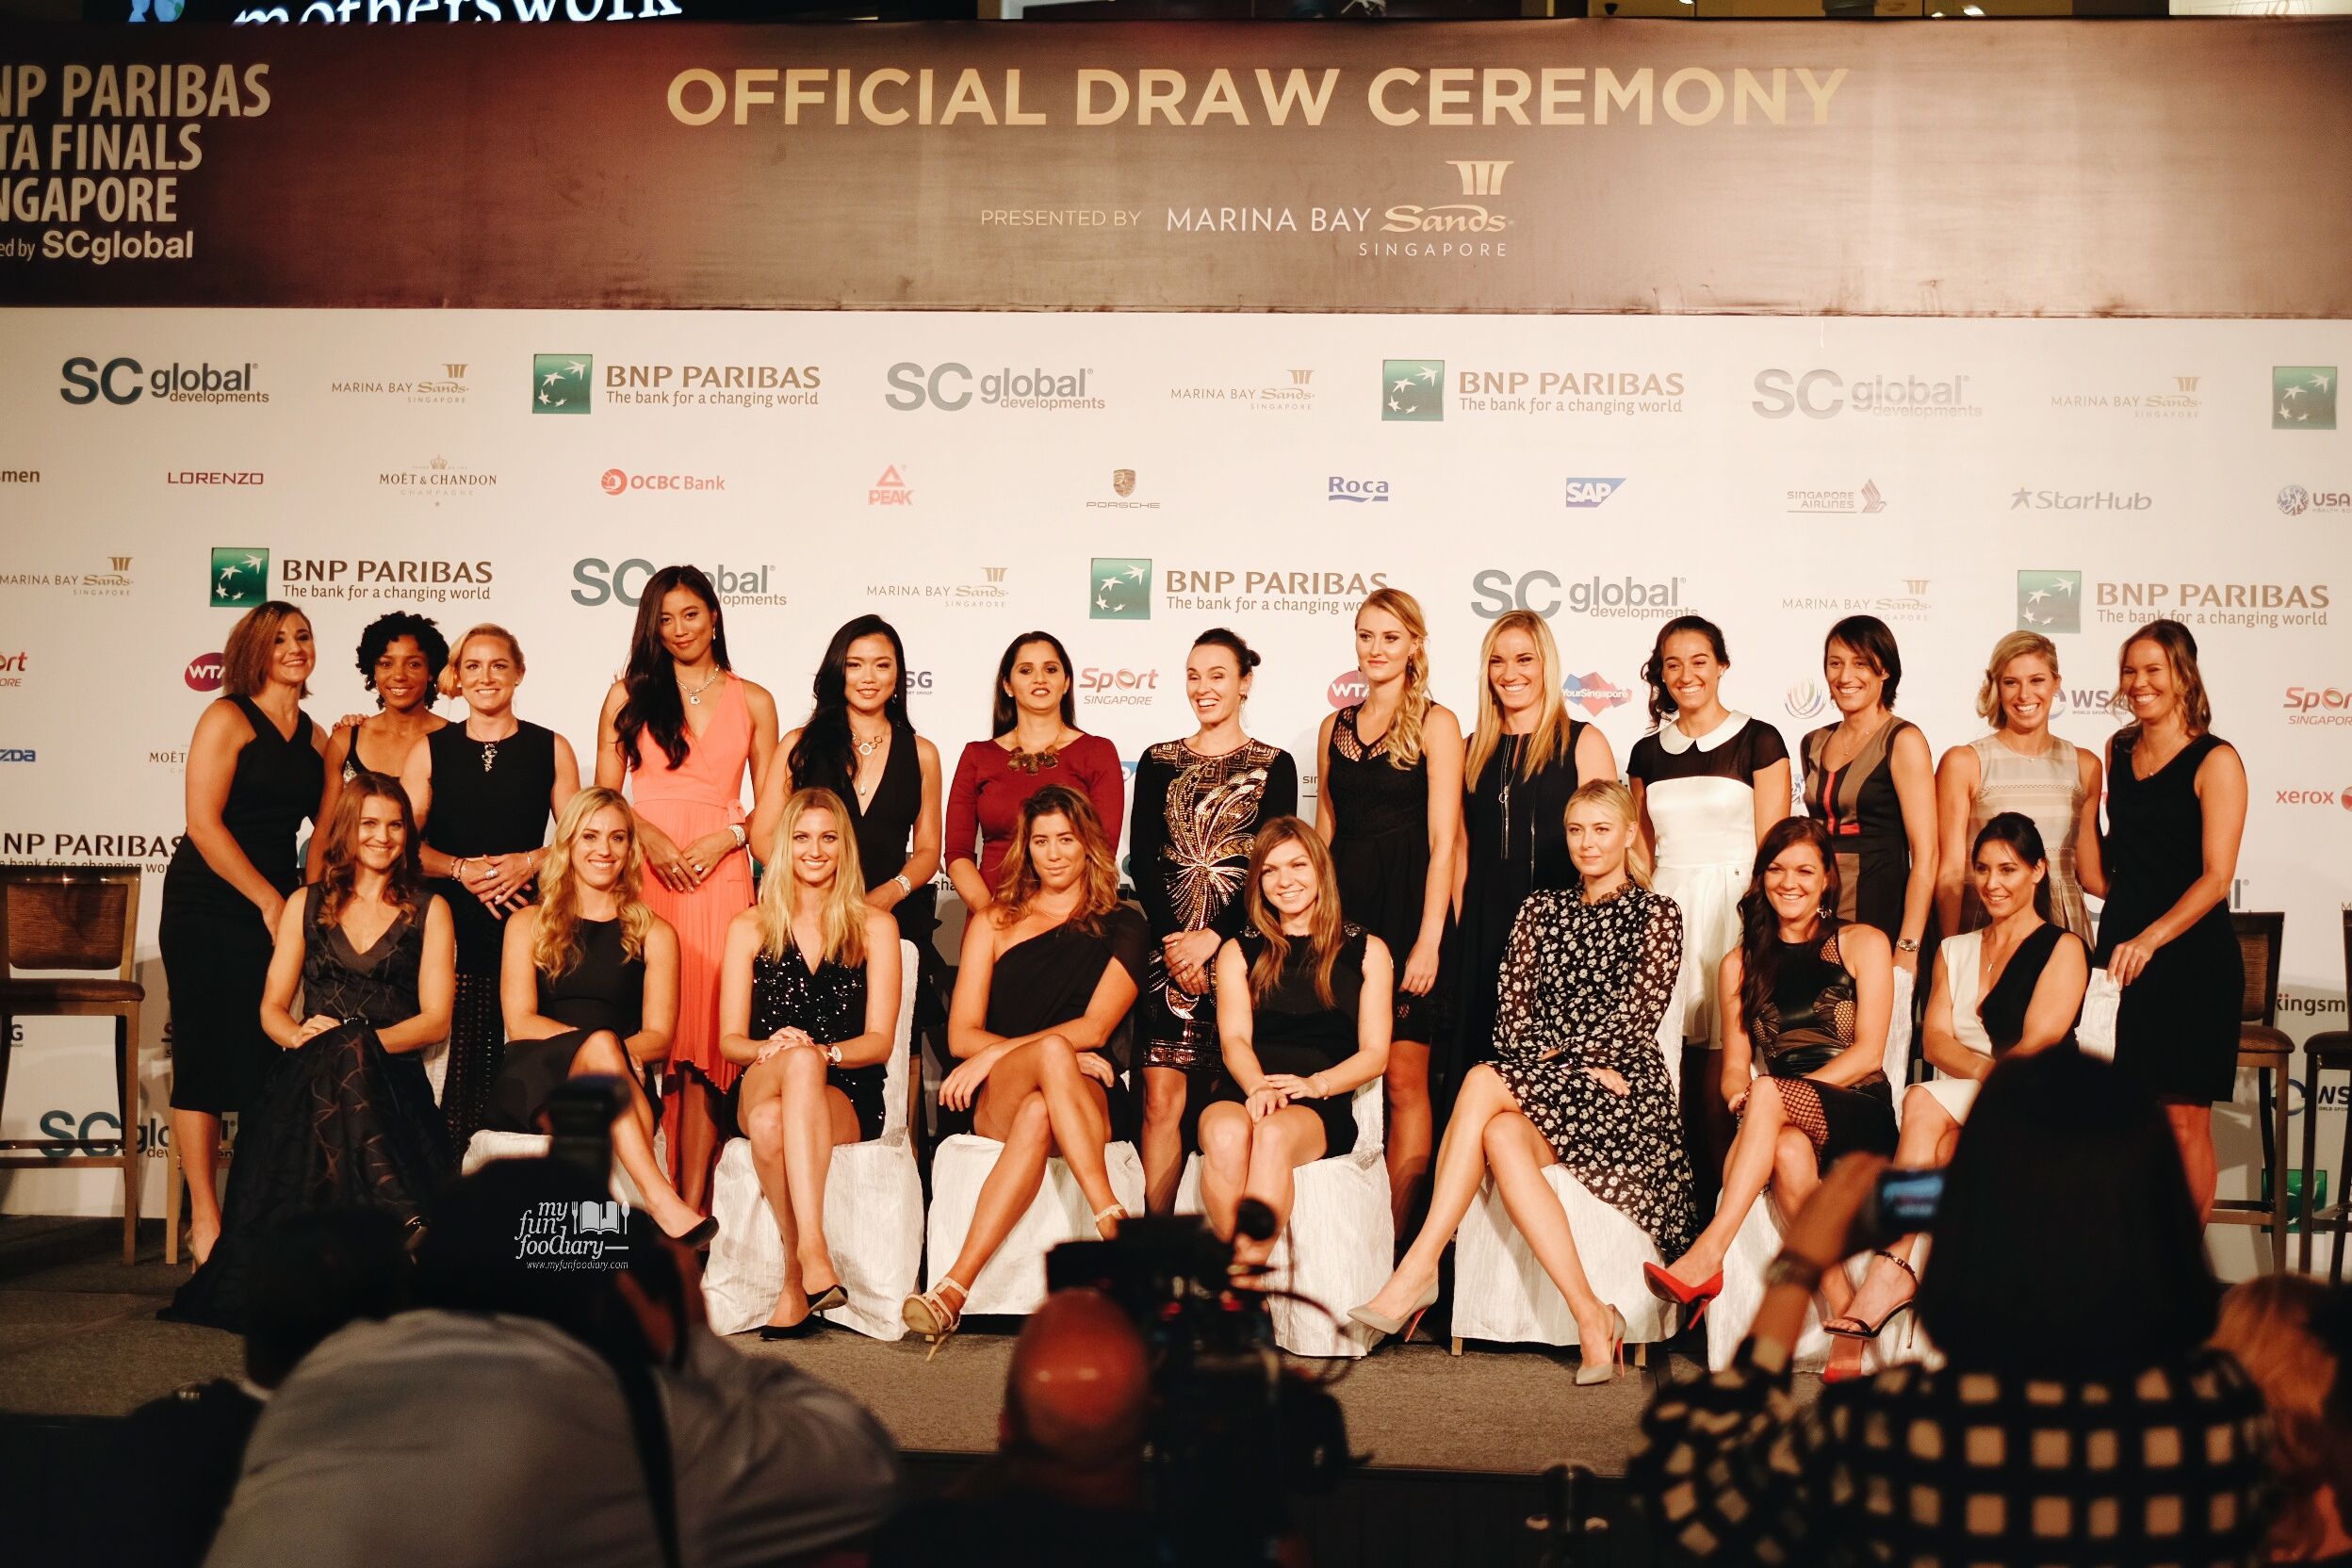 All Women Tennis Player for WTA Finals at Marina Bay Sands by Myfunfoodiary